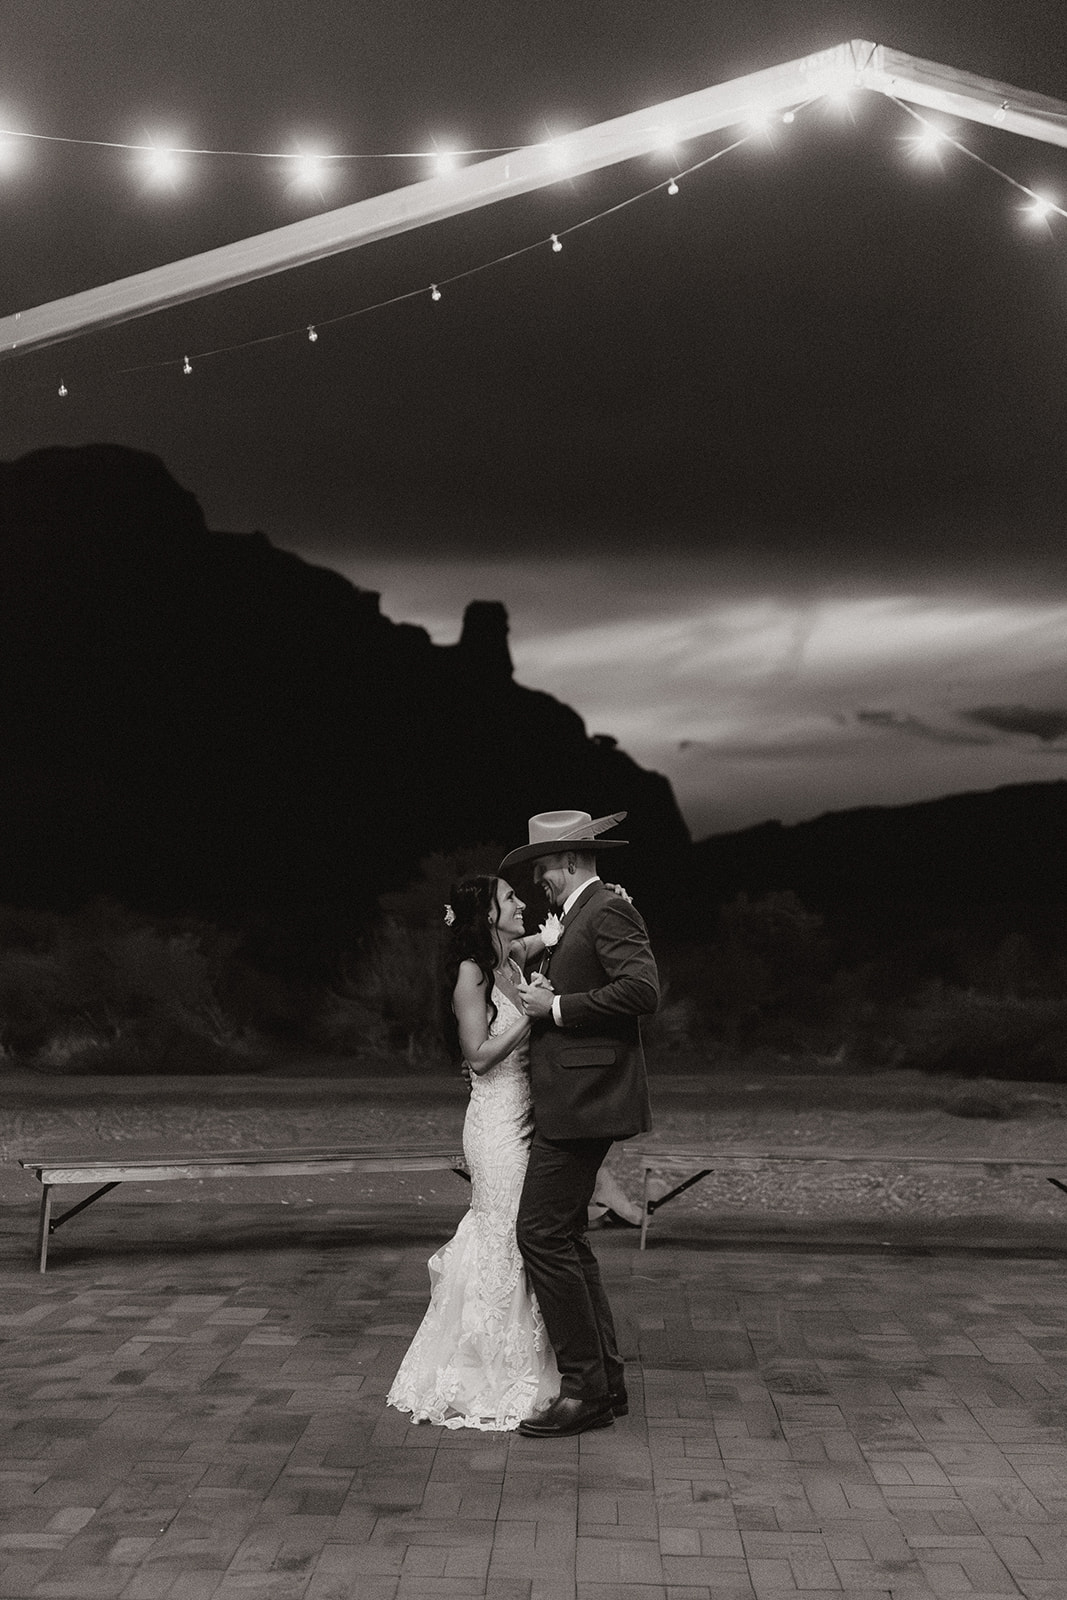 bride and groom share their first dance together with the dreamy Arizona sky in the background